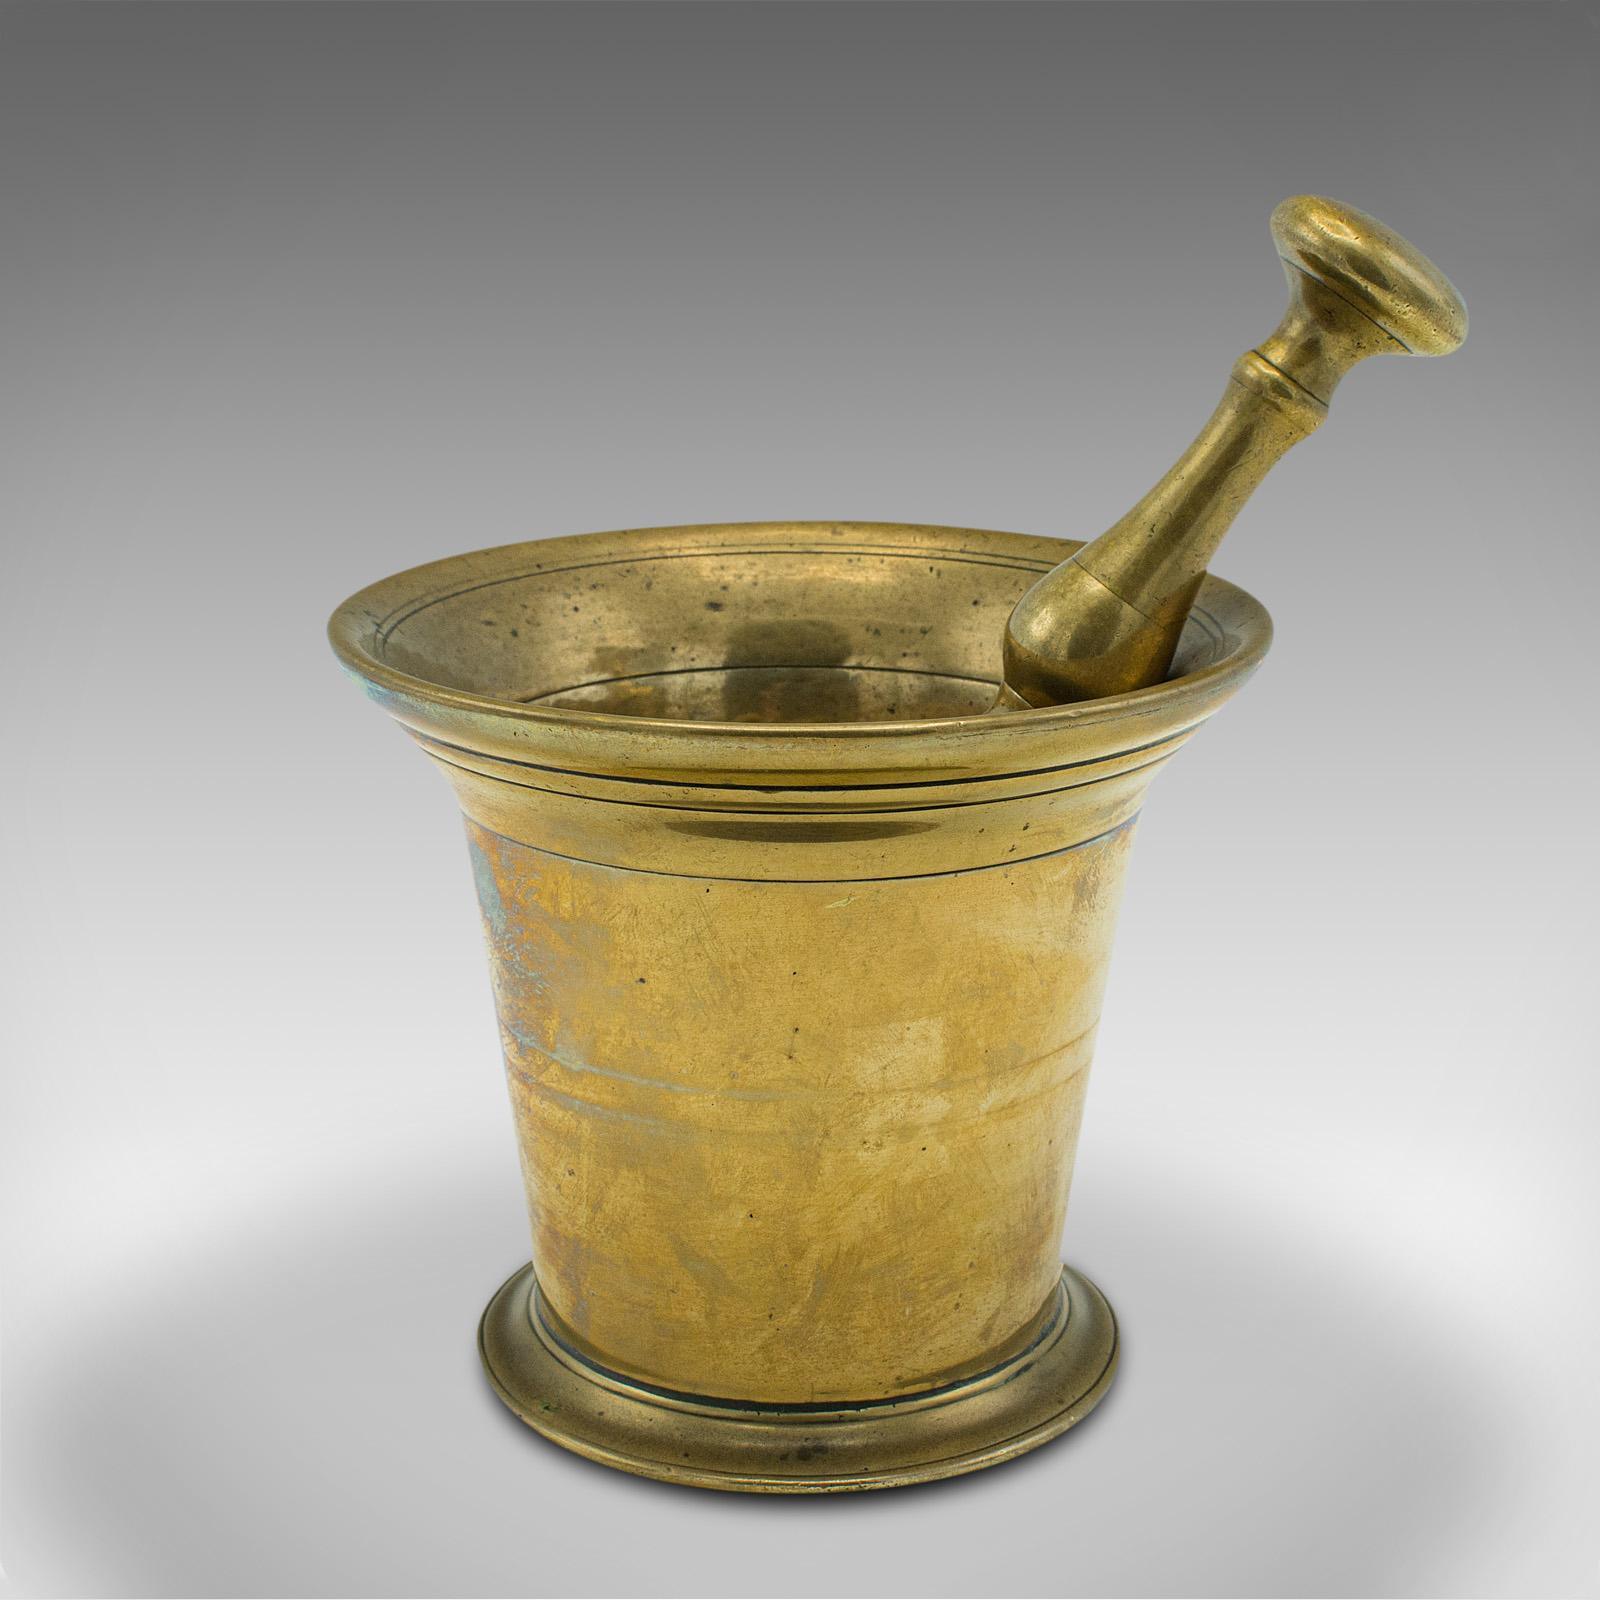 Antique Apothecary Mortar and Pestle, English, Brass, Chemist, Victorian, C.1850 In Good Condition For Sale In Hele, Devon, GB